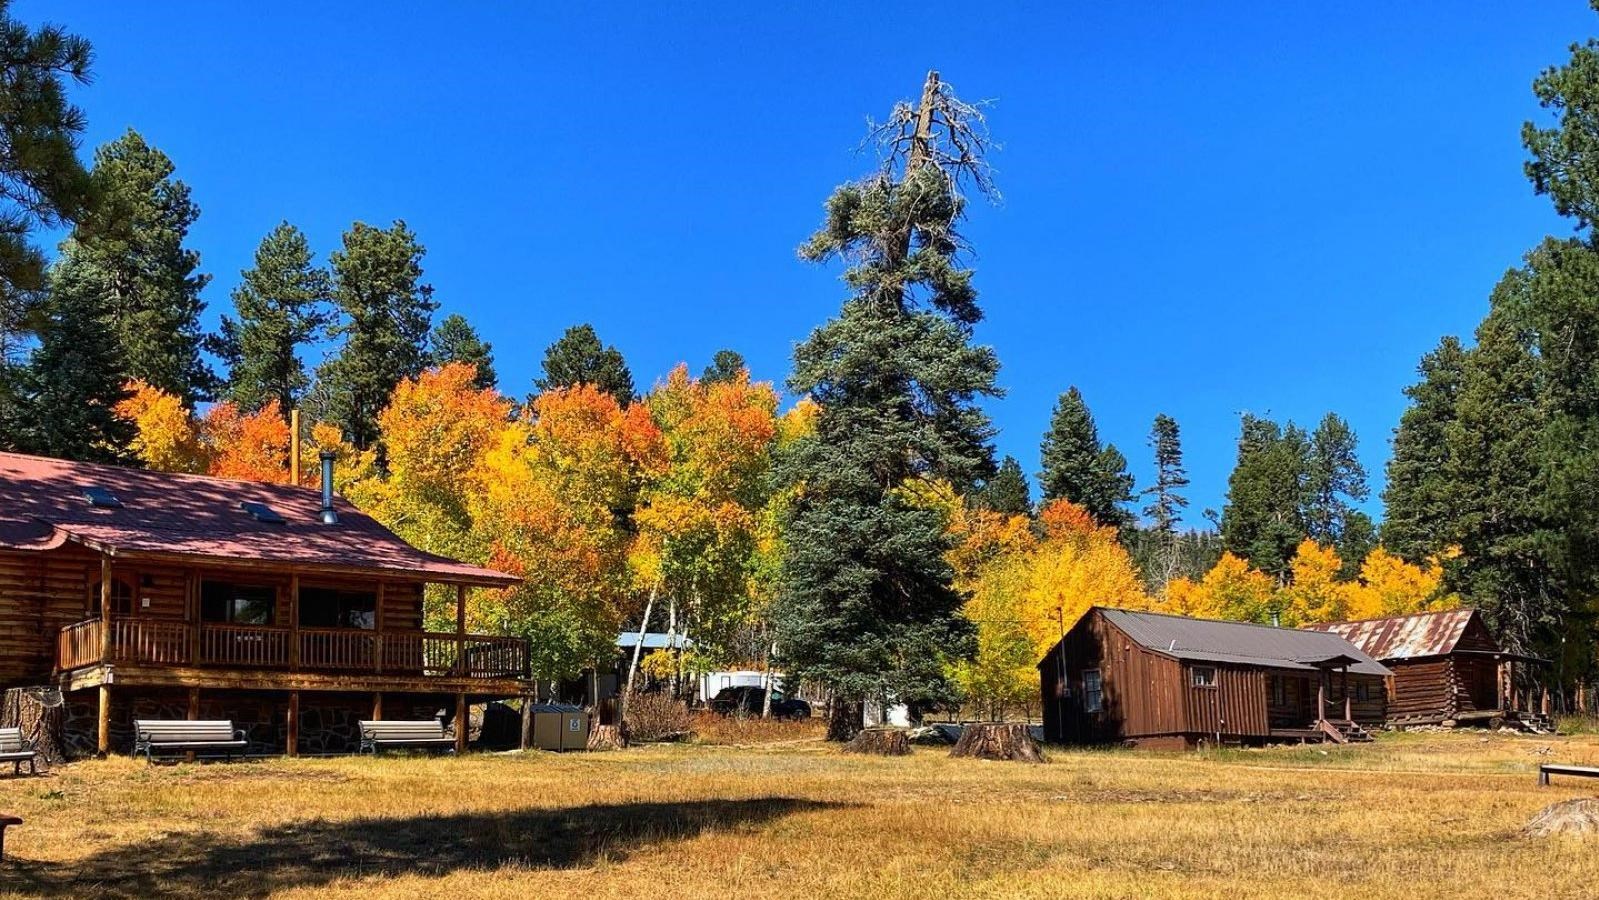 Three wooden cabins with front porches. Yellow and orange aspen trees and blue sky in the background